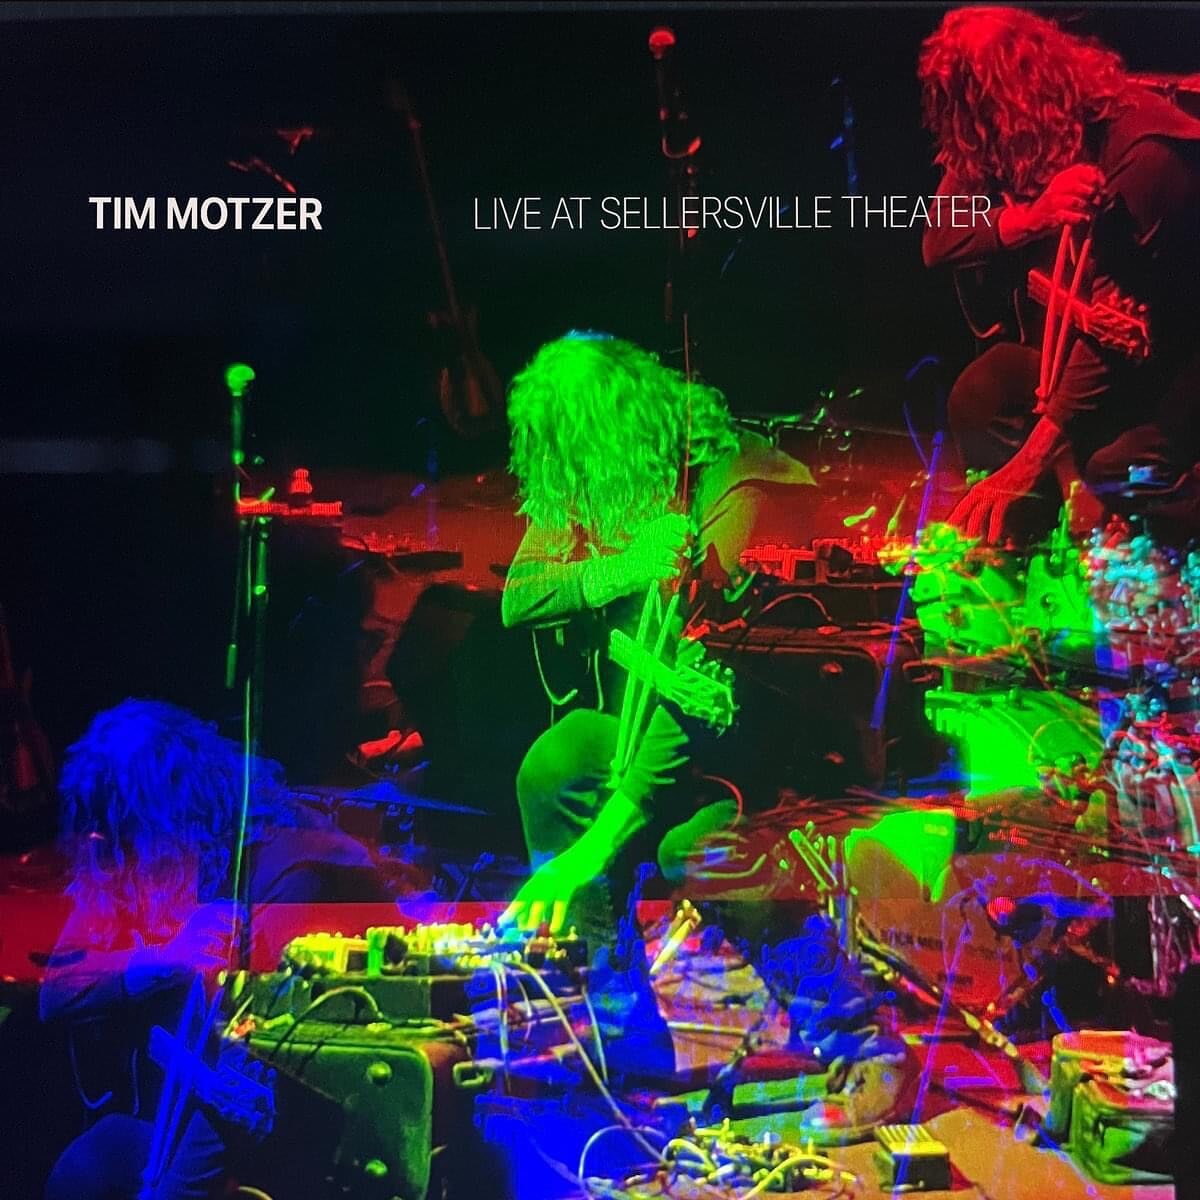 NEW 1K RELEASE: Tim Motzer - Live at Sellersville Theater (1k060)
I've had many requests for this...so thought I'd release it early!
https://1krecordings.bandcamp.com/album/live-at-sellersville-theater
&quot;Taking center stage in a chair, he tricked